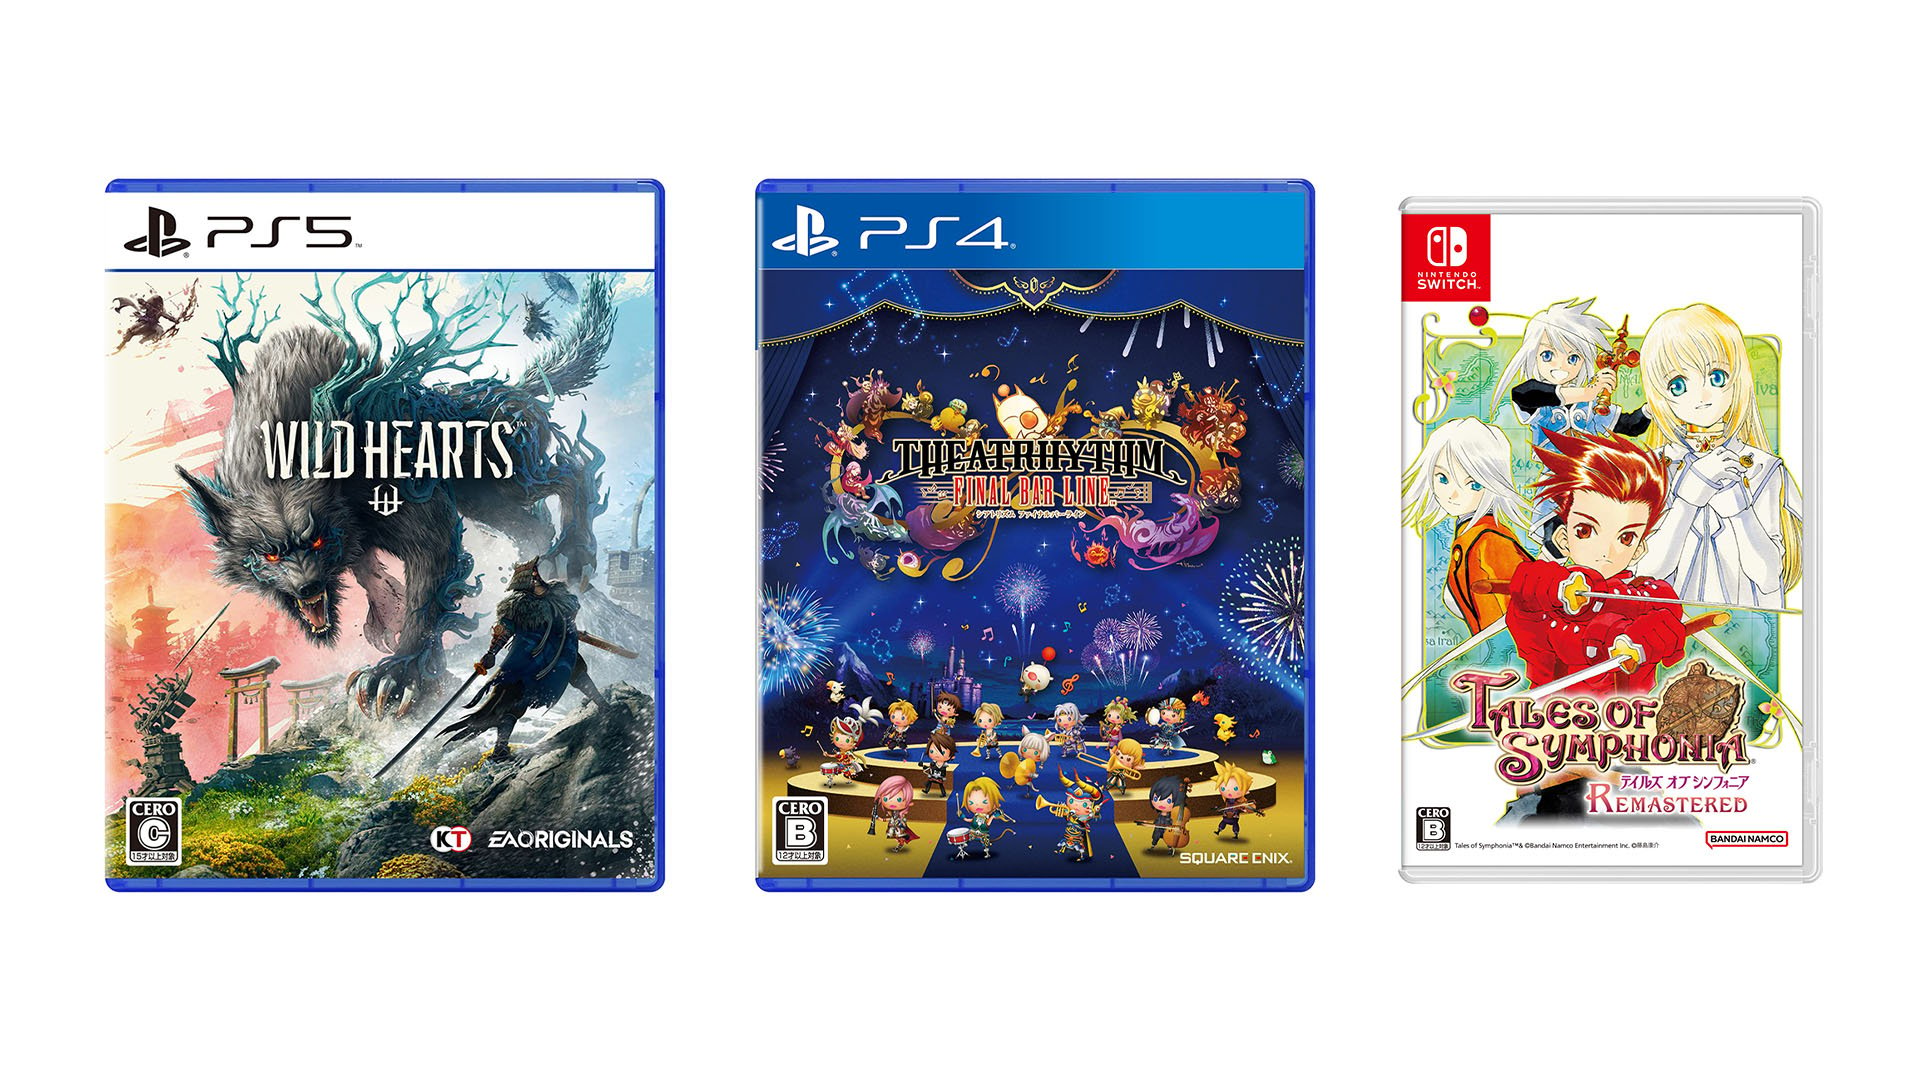 Gematsu Theatrhythm: Symphonia Line, more Japanese Remastered, WILD Tales HEARTS, Bar Game - Week\'s Final of Releases: This